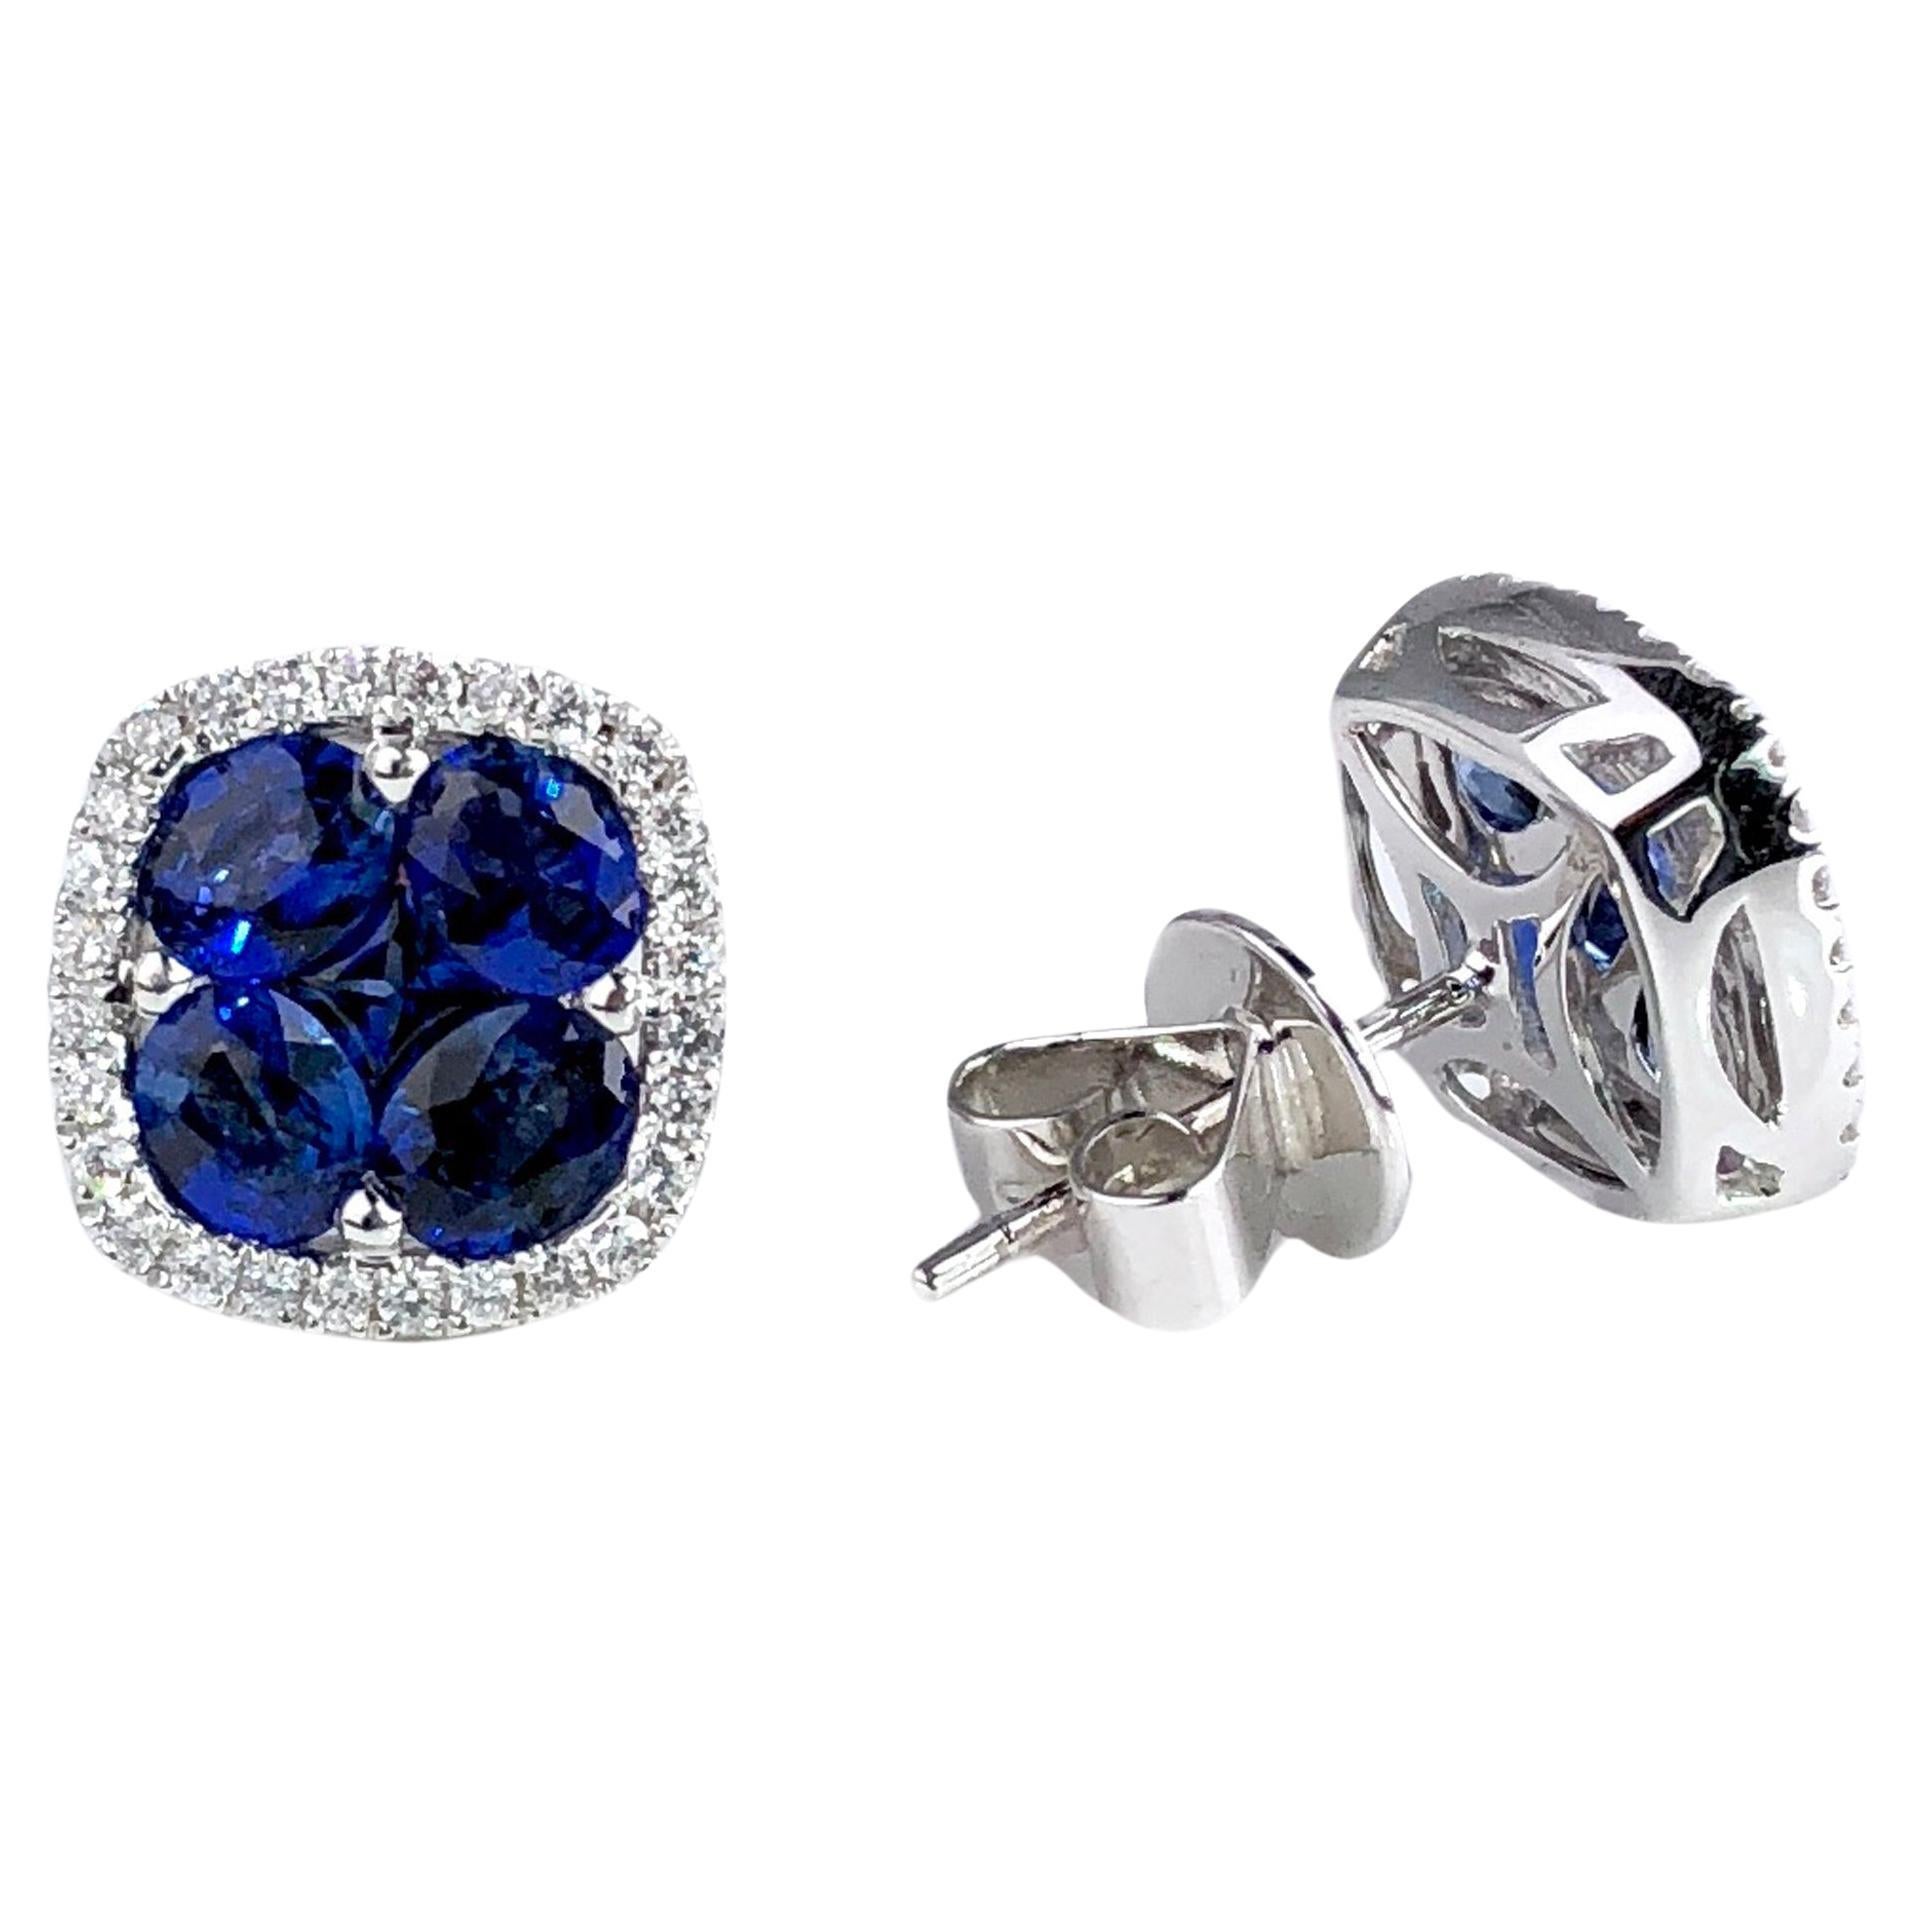 Discover these stud earrings, showcasing a captivating cluster of five exquisite blue sapphires per earring, totaling 2.6 carats, elegantly encircled by a glistening halo of round natural diamonds with a combined weight of 0.21 carats. Set in